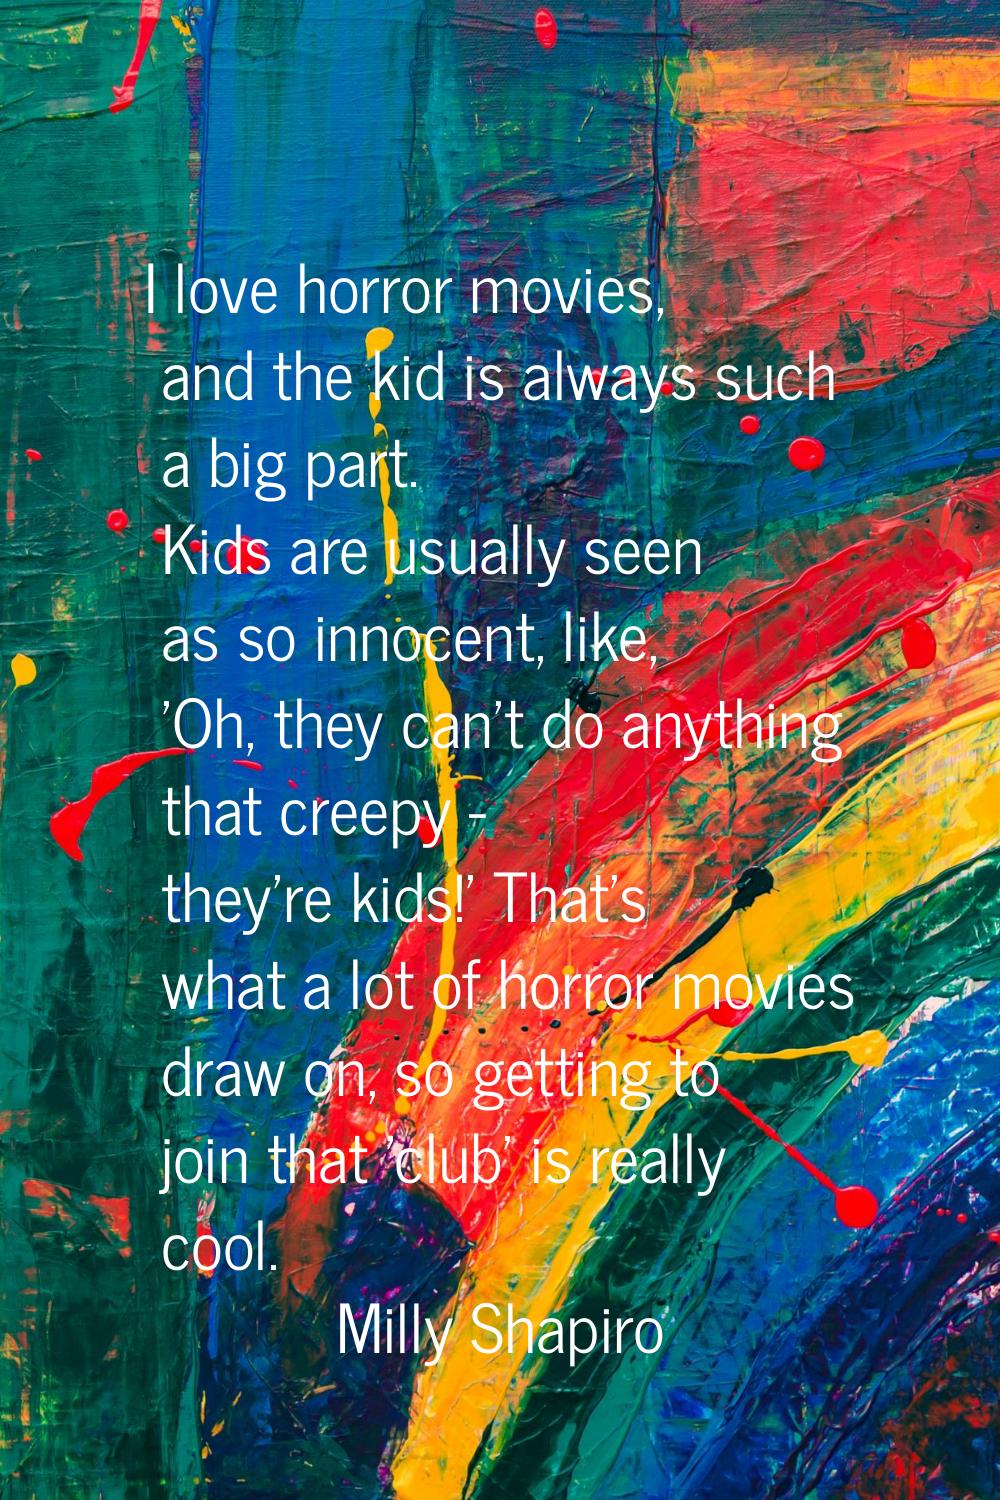 I love horror movies, and the kid is always such a big part. Kids are usually seen as so innocent, 